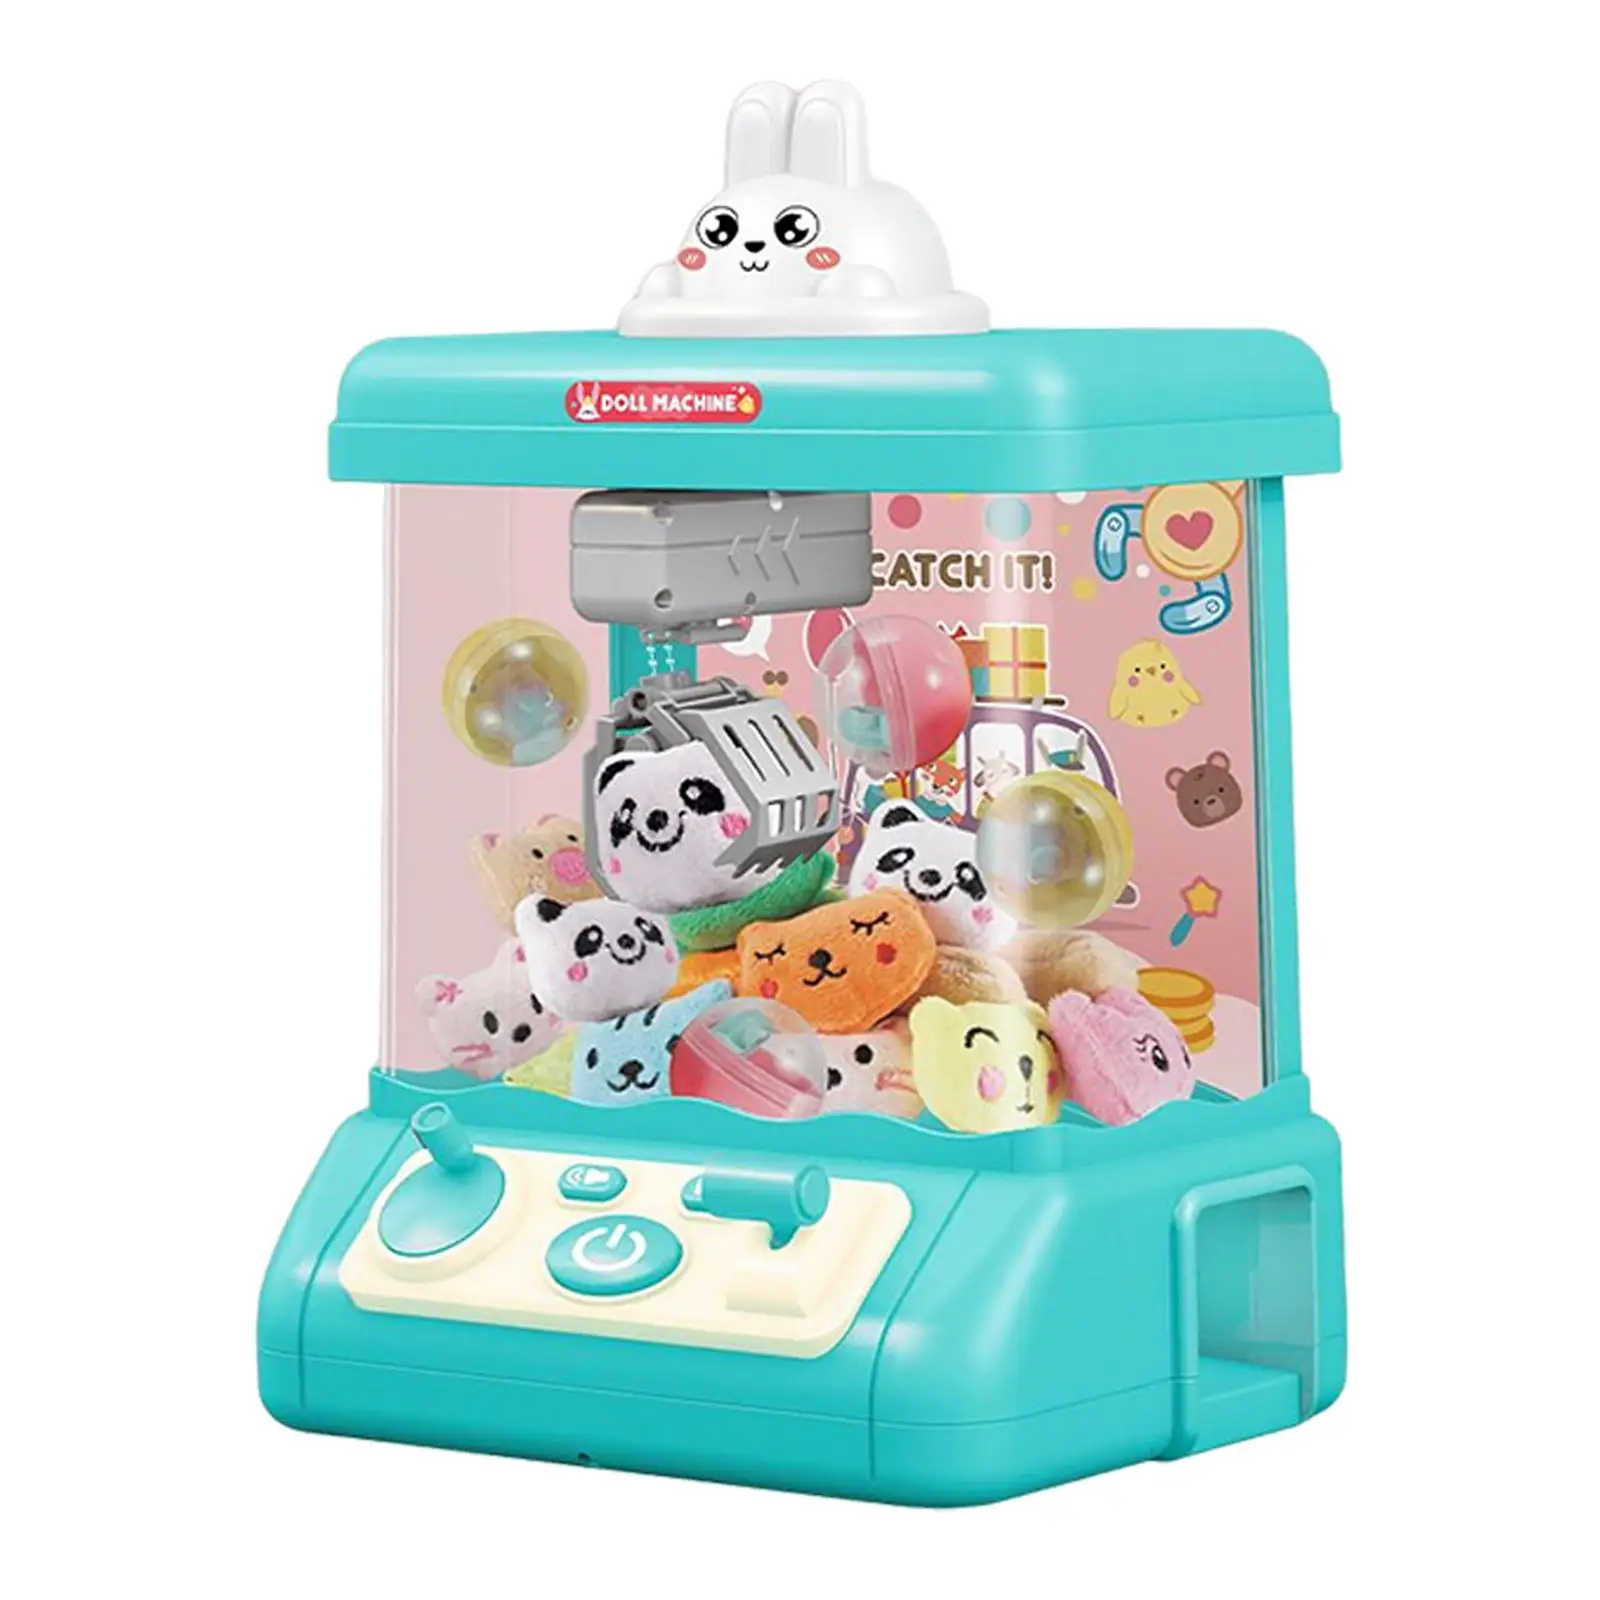 Household Claw Machine Intelligent System Doll Machine DIY Catching Doll Machine Slot Machine Grabber Machine for Birthday Gifts